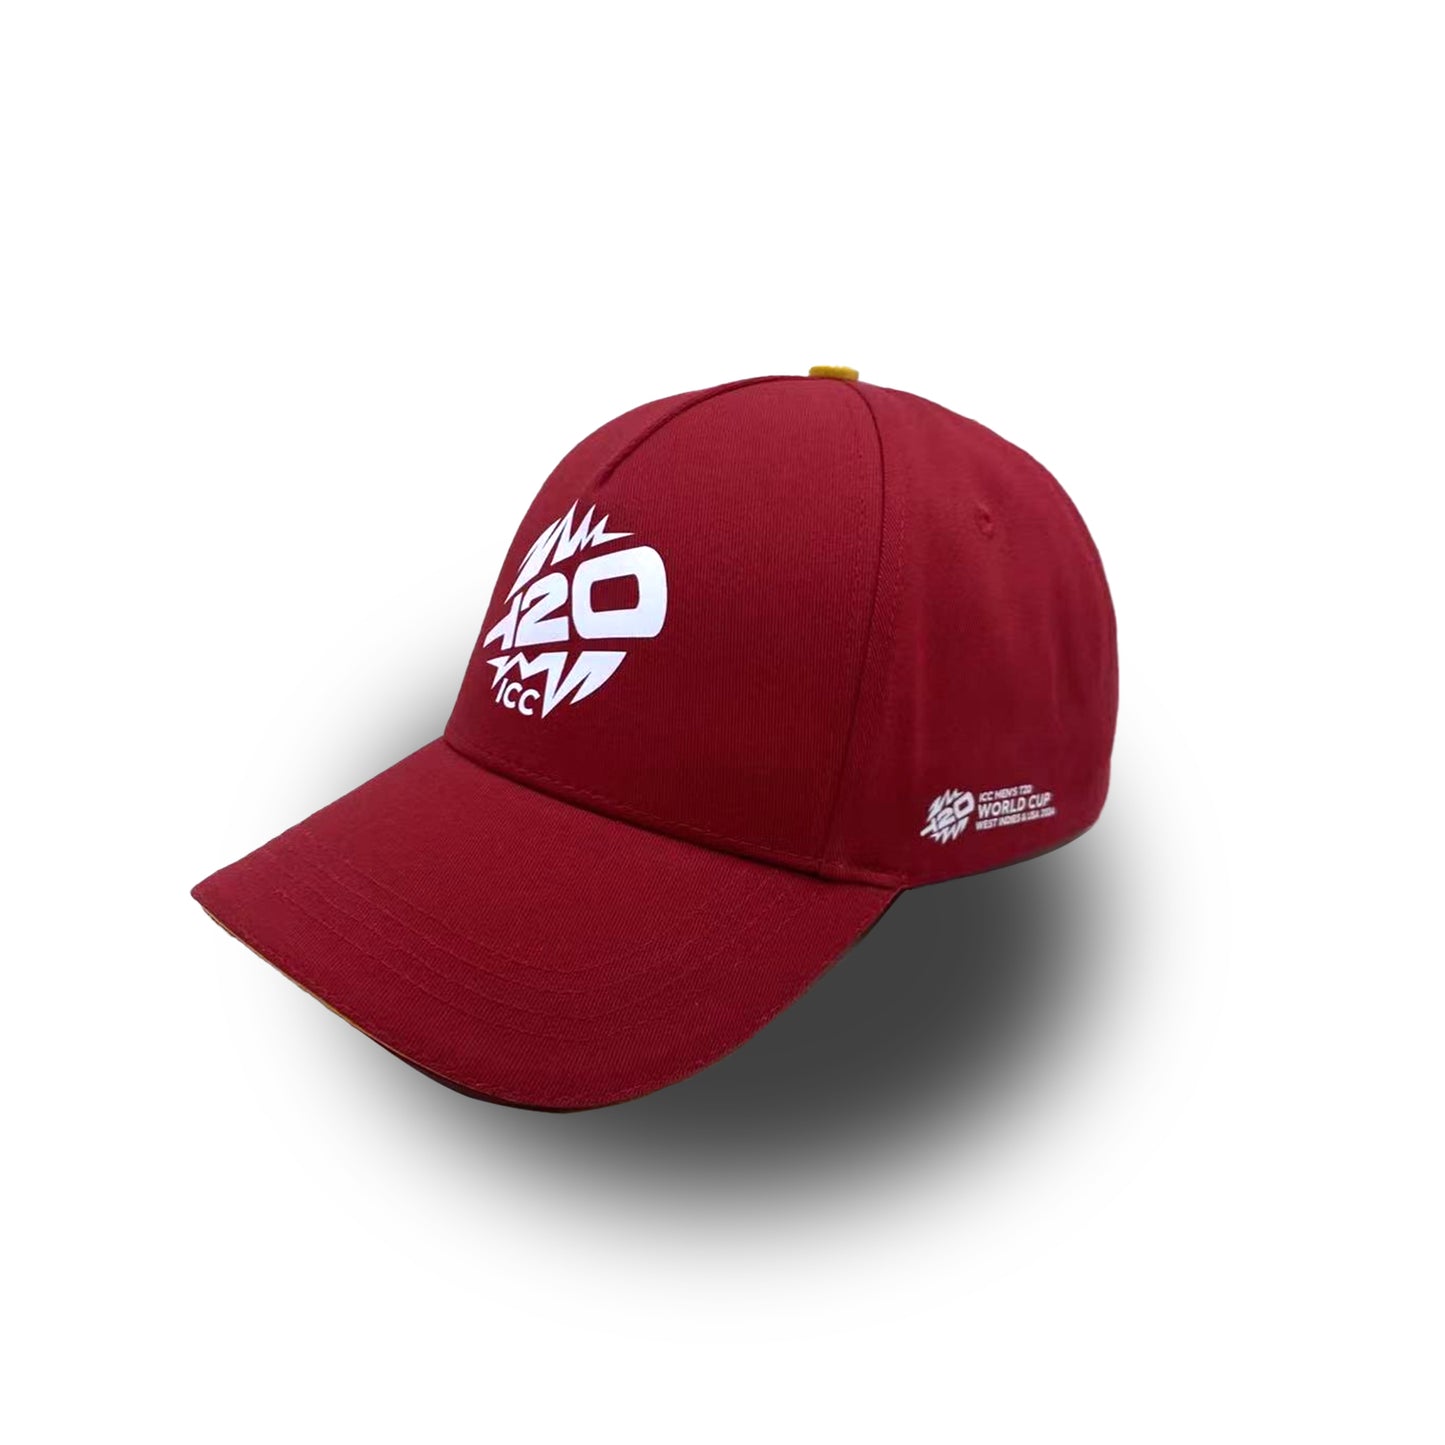 ICC T20 World Cup Maroon Cap - West Indies & USA 2024 Edition